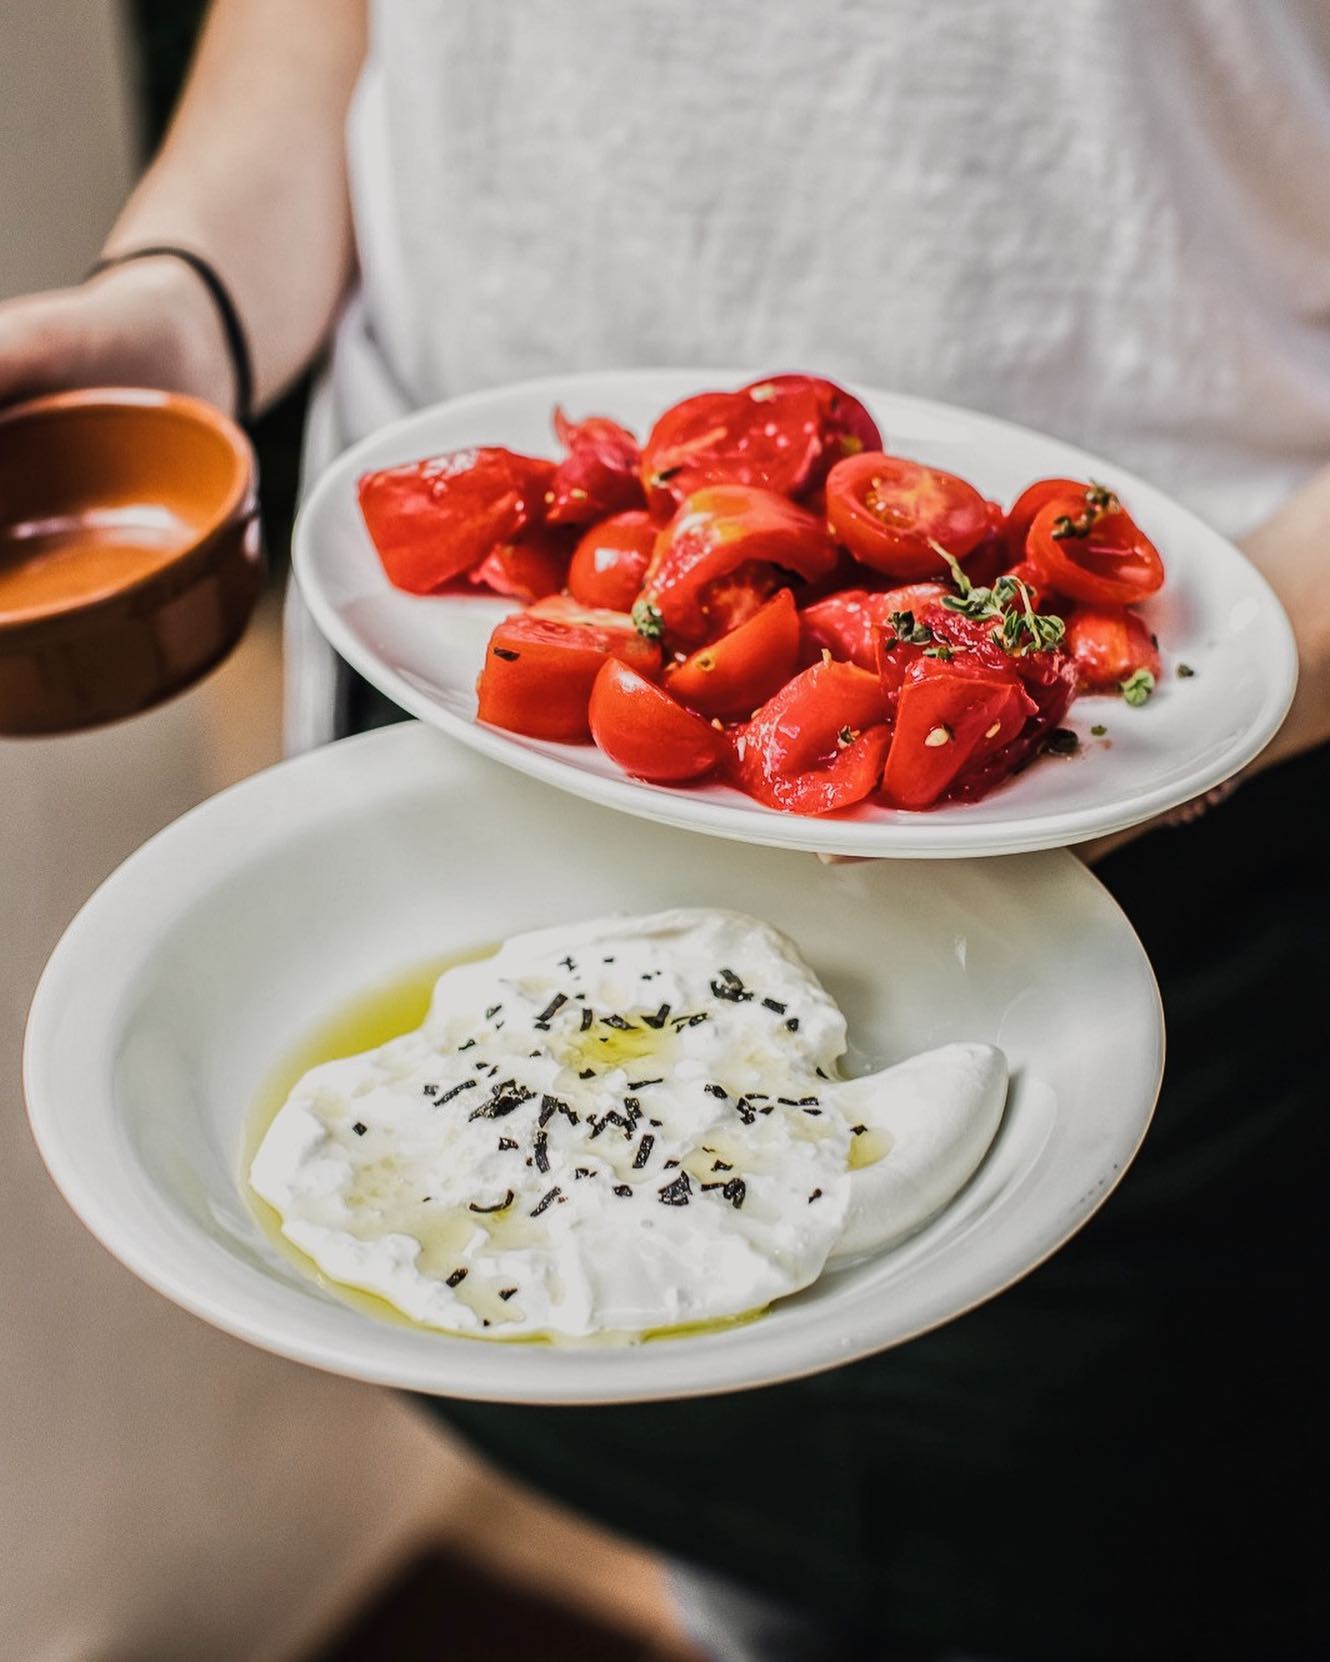 A person holds a bowl of cut cherry tomatoes and a burrata on a plate